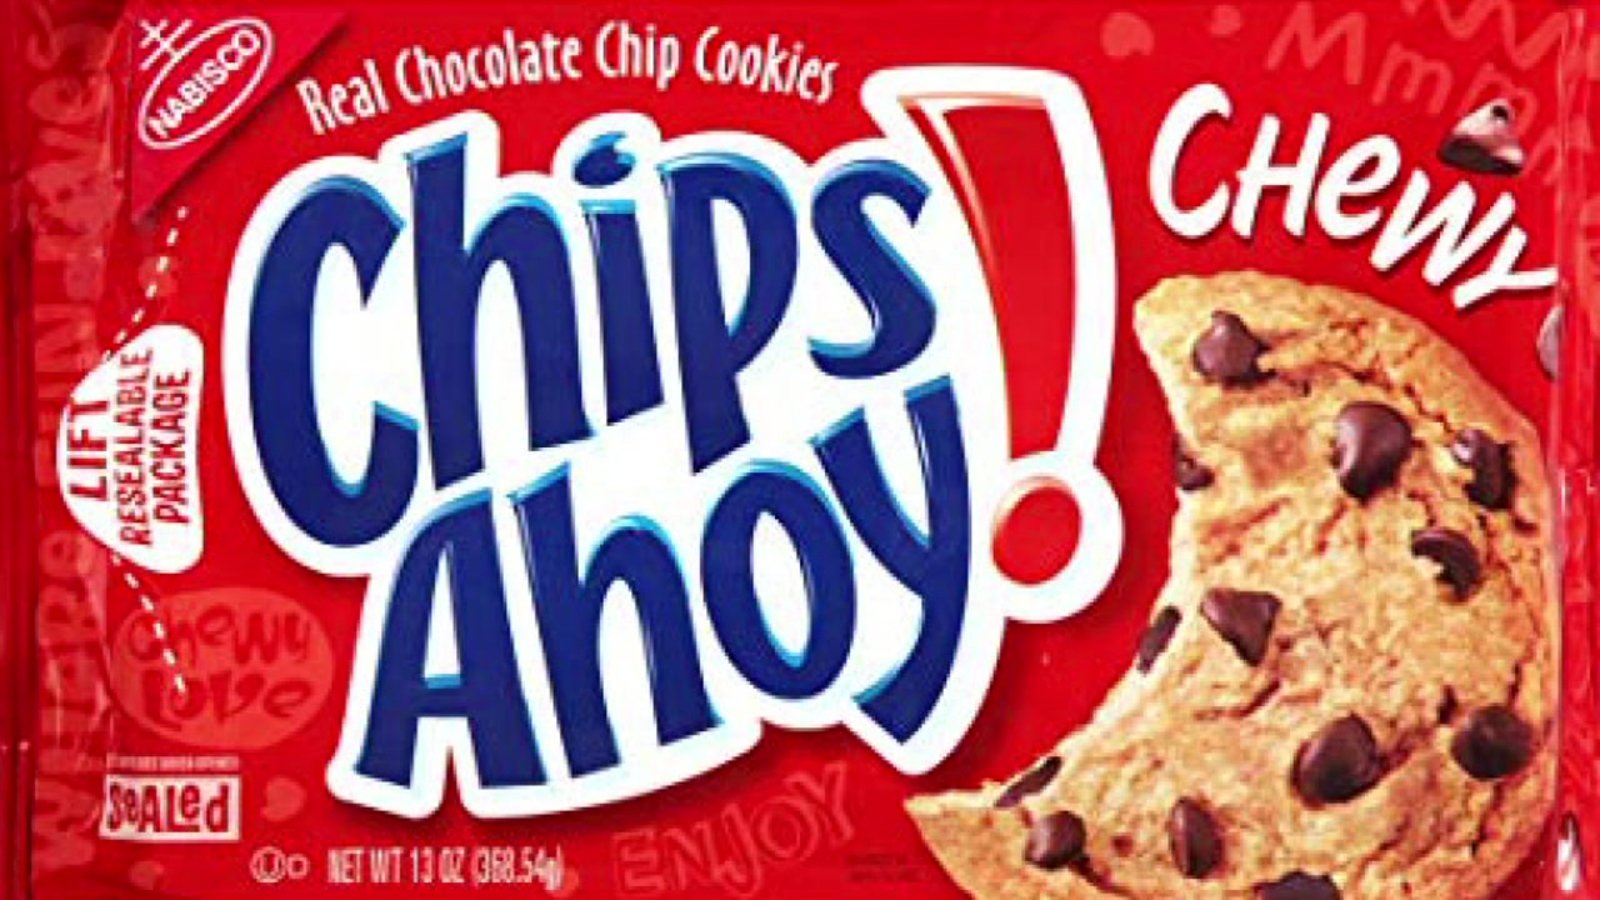 Chips Ahoy Chewy recall: Mondelēz issues recall; cookies may contain 'unexpected solidified ingredient'